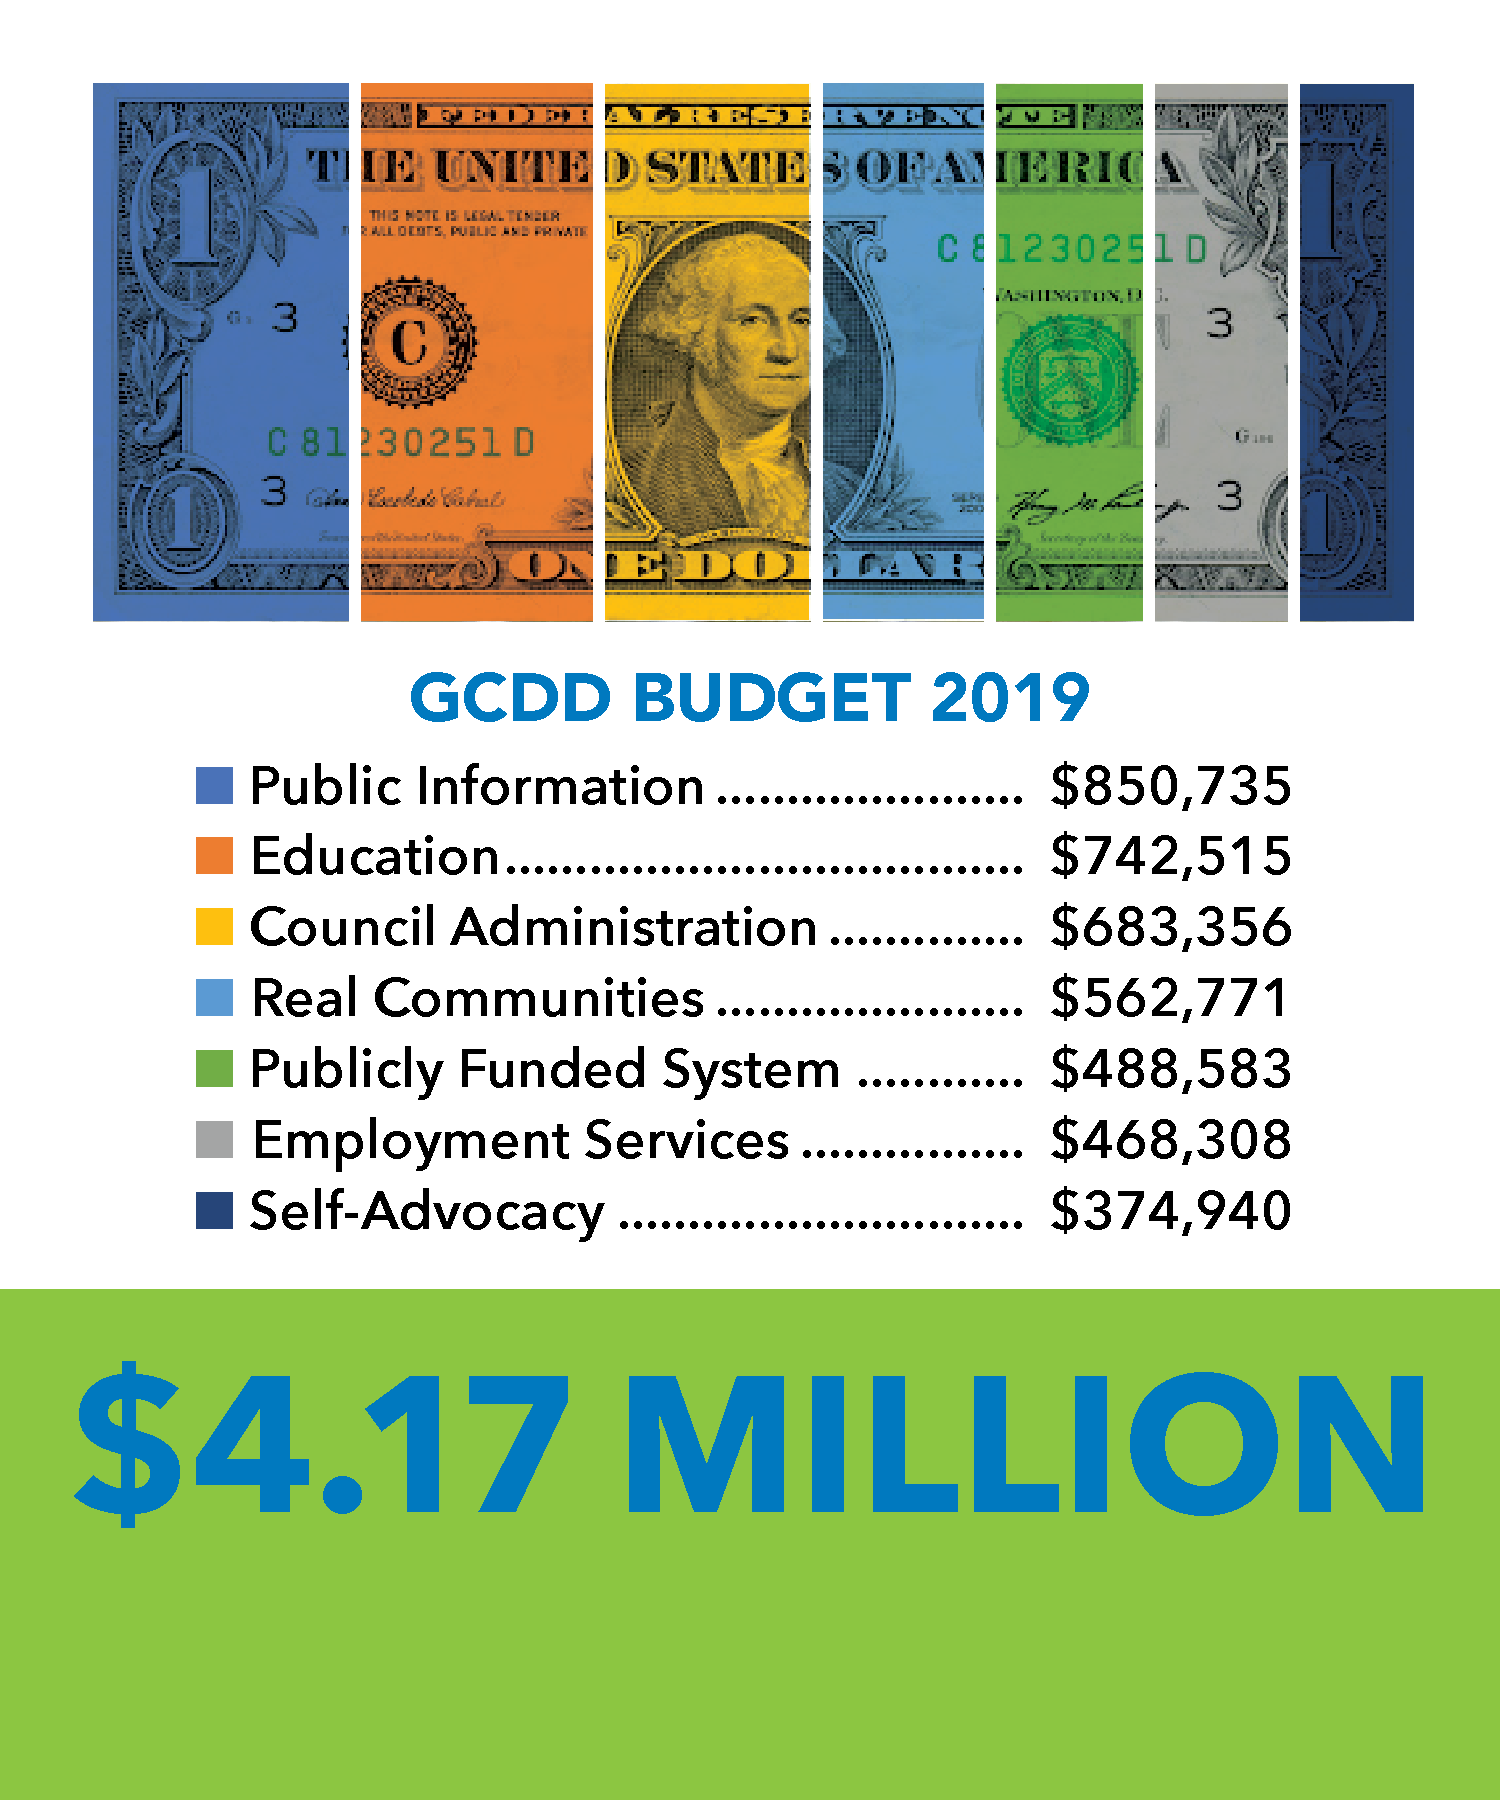 $4.17 Million - Amount per year GCDD spends to support people with developmental disabilities in Georgia  (Period covered: Oct 1, 2018 - Sep 30, 2019) 